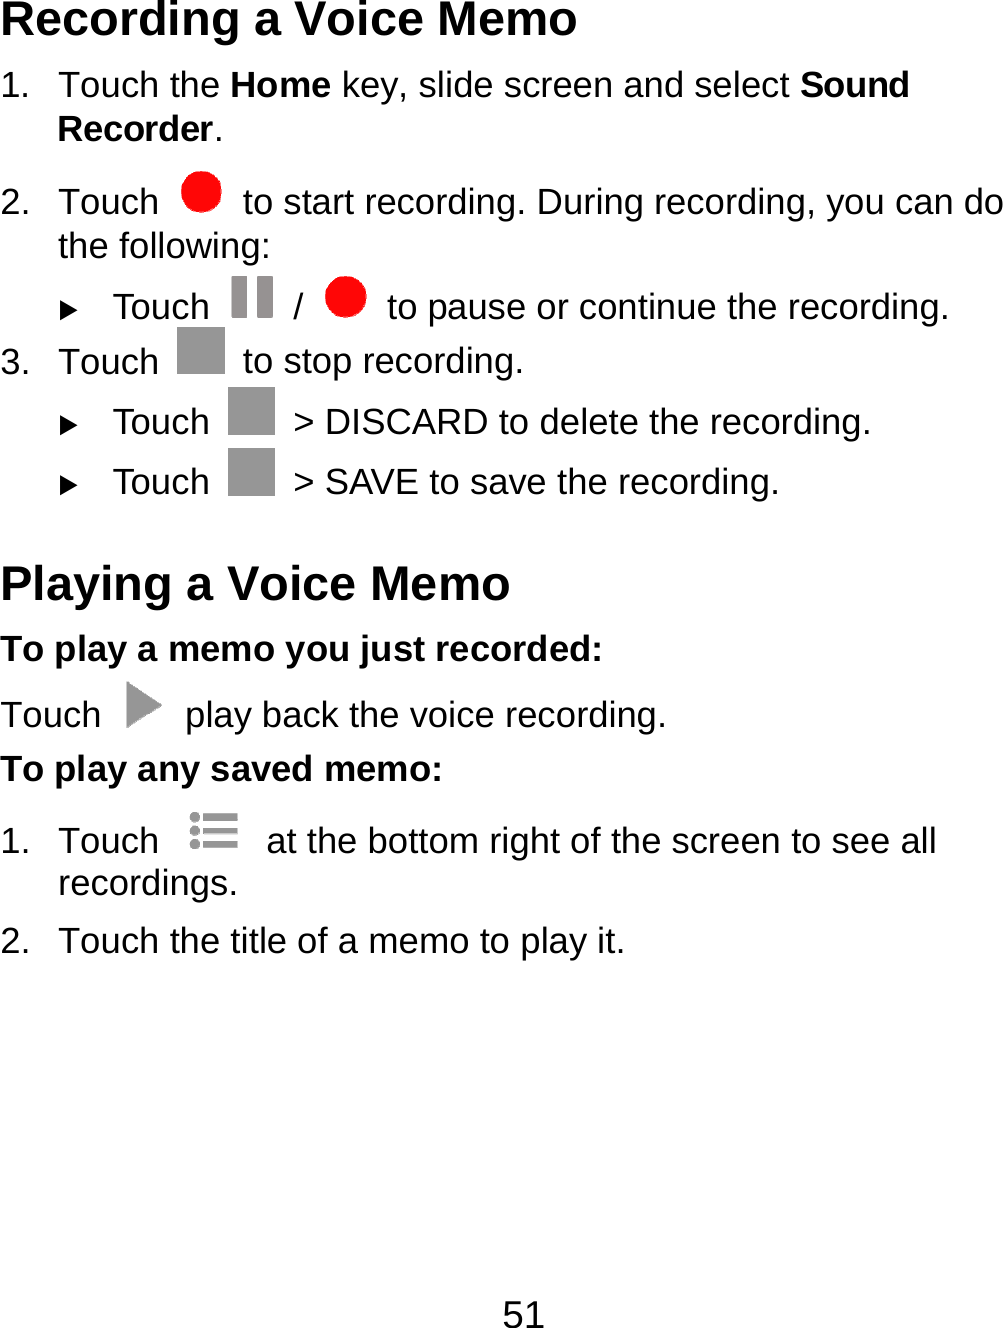 51 Recording a Voice Memo 1. Touch the Home key, slide screen and select Sound Recorder. 2. Touch    to start recording. During recording, you can do the following:  Touch   /    to pause or continue the recording. 3. Touch    to stop recording.    Touch    &gt; DISCARD to delete the recording.  Touch    &gt; SAVE to save the recording. Playing a Voice Memo To play a memo you just recorded: Touch    play back the voice recording. To play any saved memo: 1. Touch    at the bottom right of the screen to see all recordings. 2.  Touch the title of a memo to play it. 